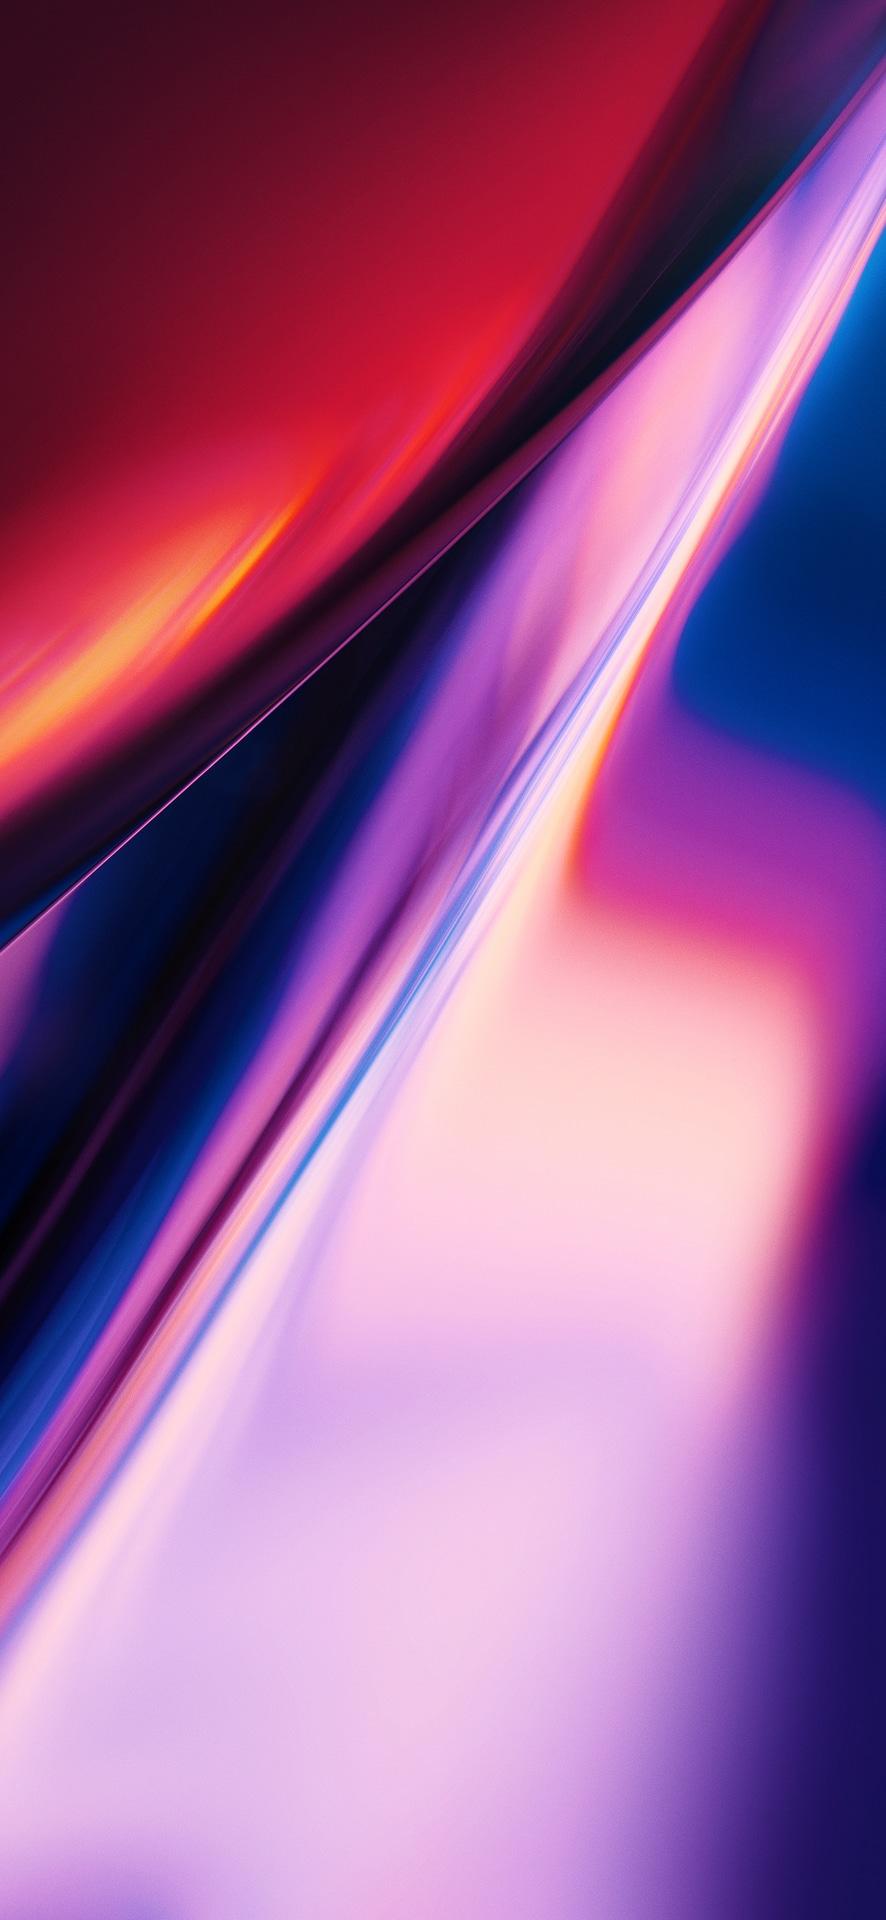 Download the OnePlus 7 Pro wallpaper here